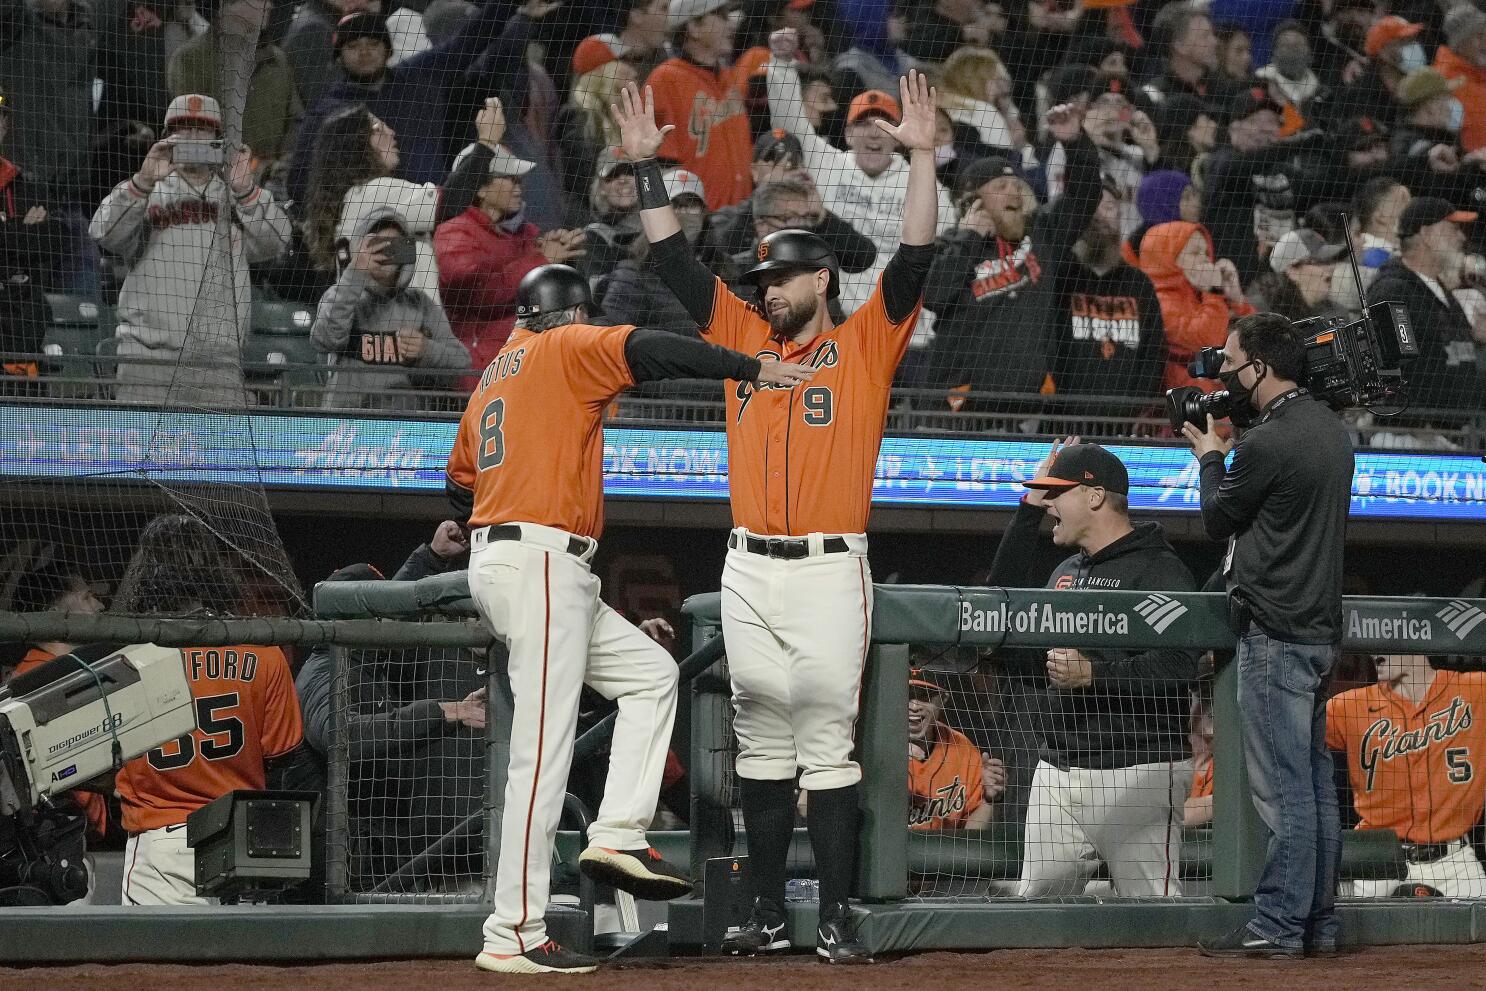 Giants beat Dodgers 3-2 in 11th on error, take NL West lead - The